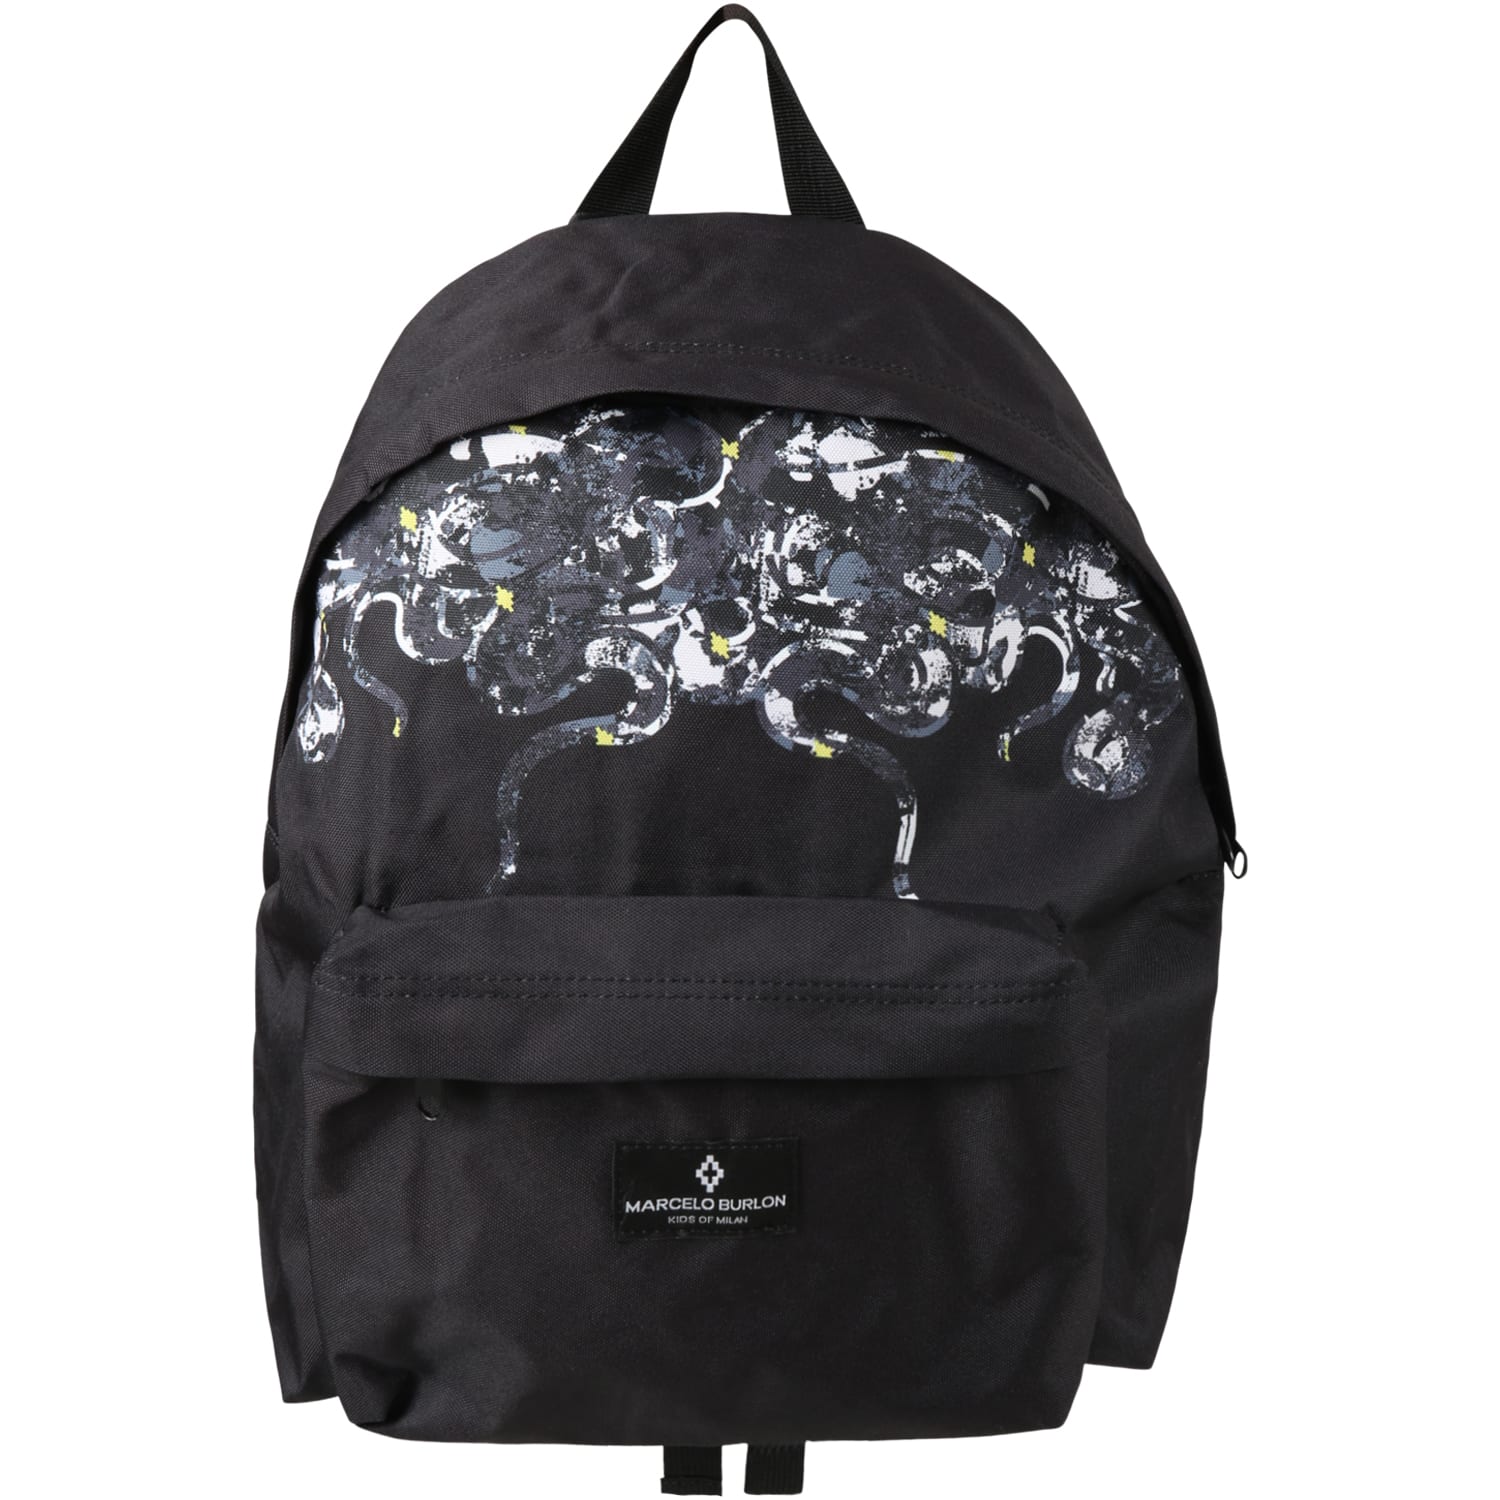 Marcelo Burlon Black Backpack For Kids With Iconic Wings